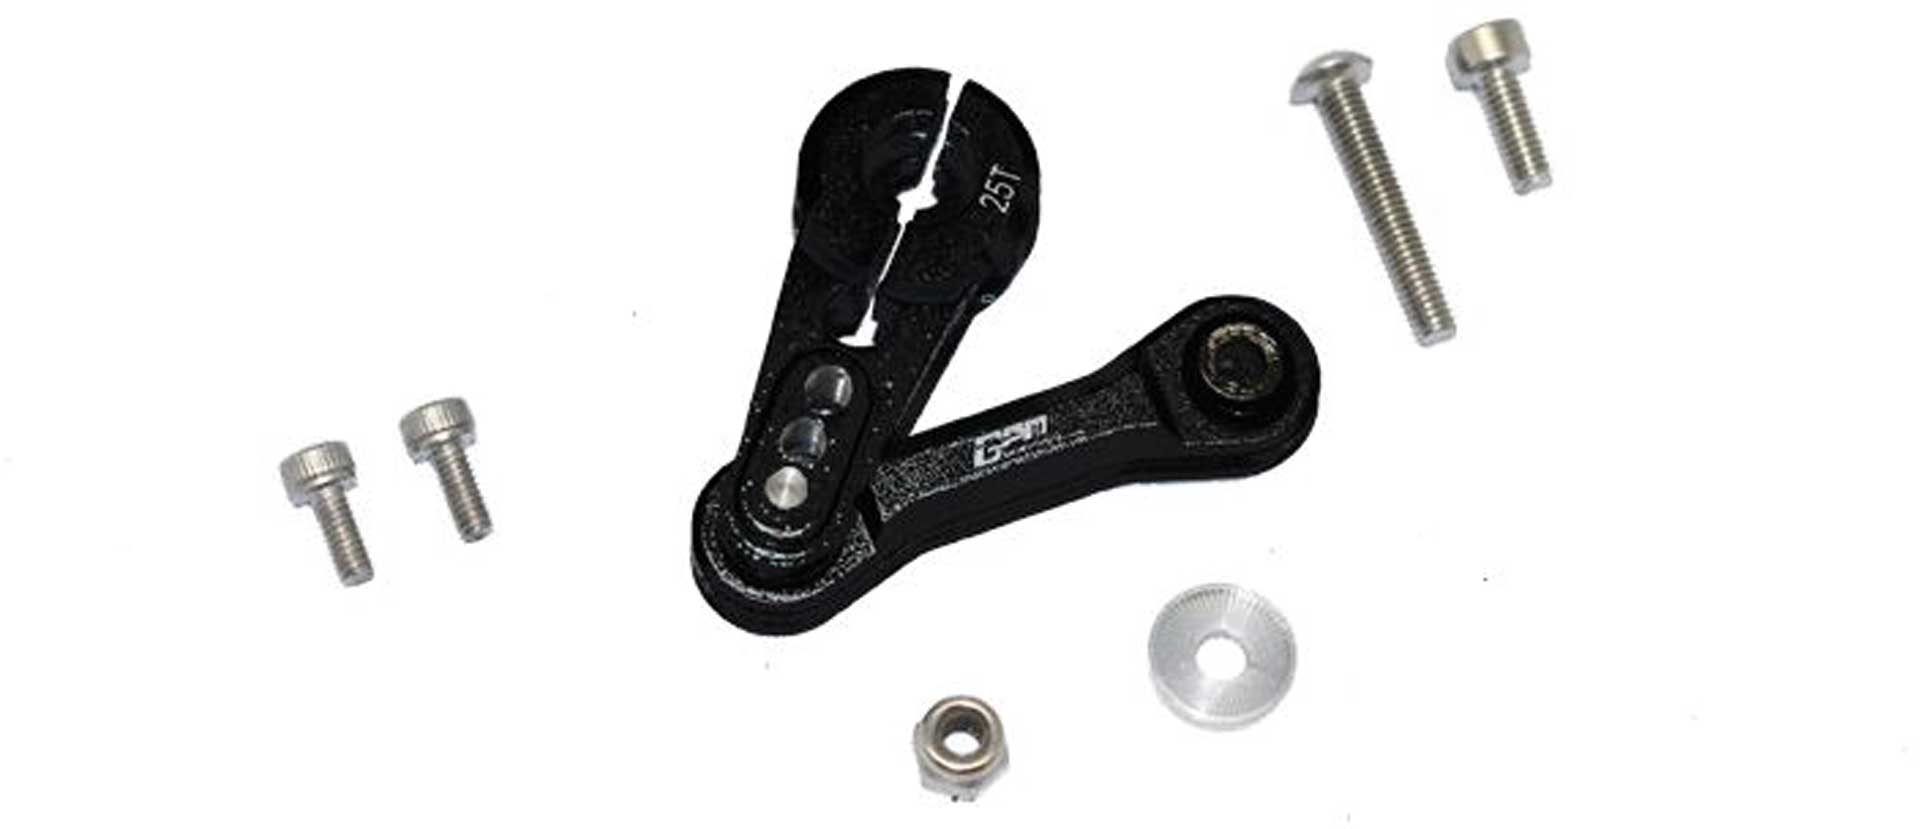 GPM Aluminum servo horn 25T with steering rod black ARRMA Kraton, Outcast, Mojave, Notor, Infra, Limitl 6s